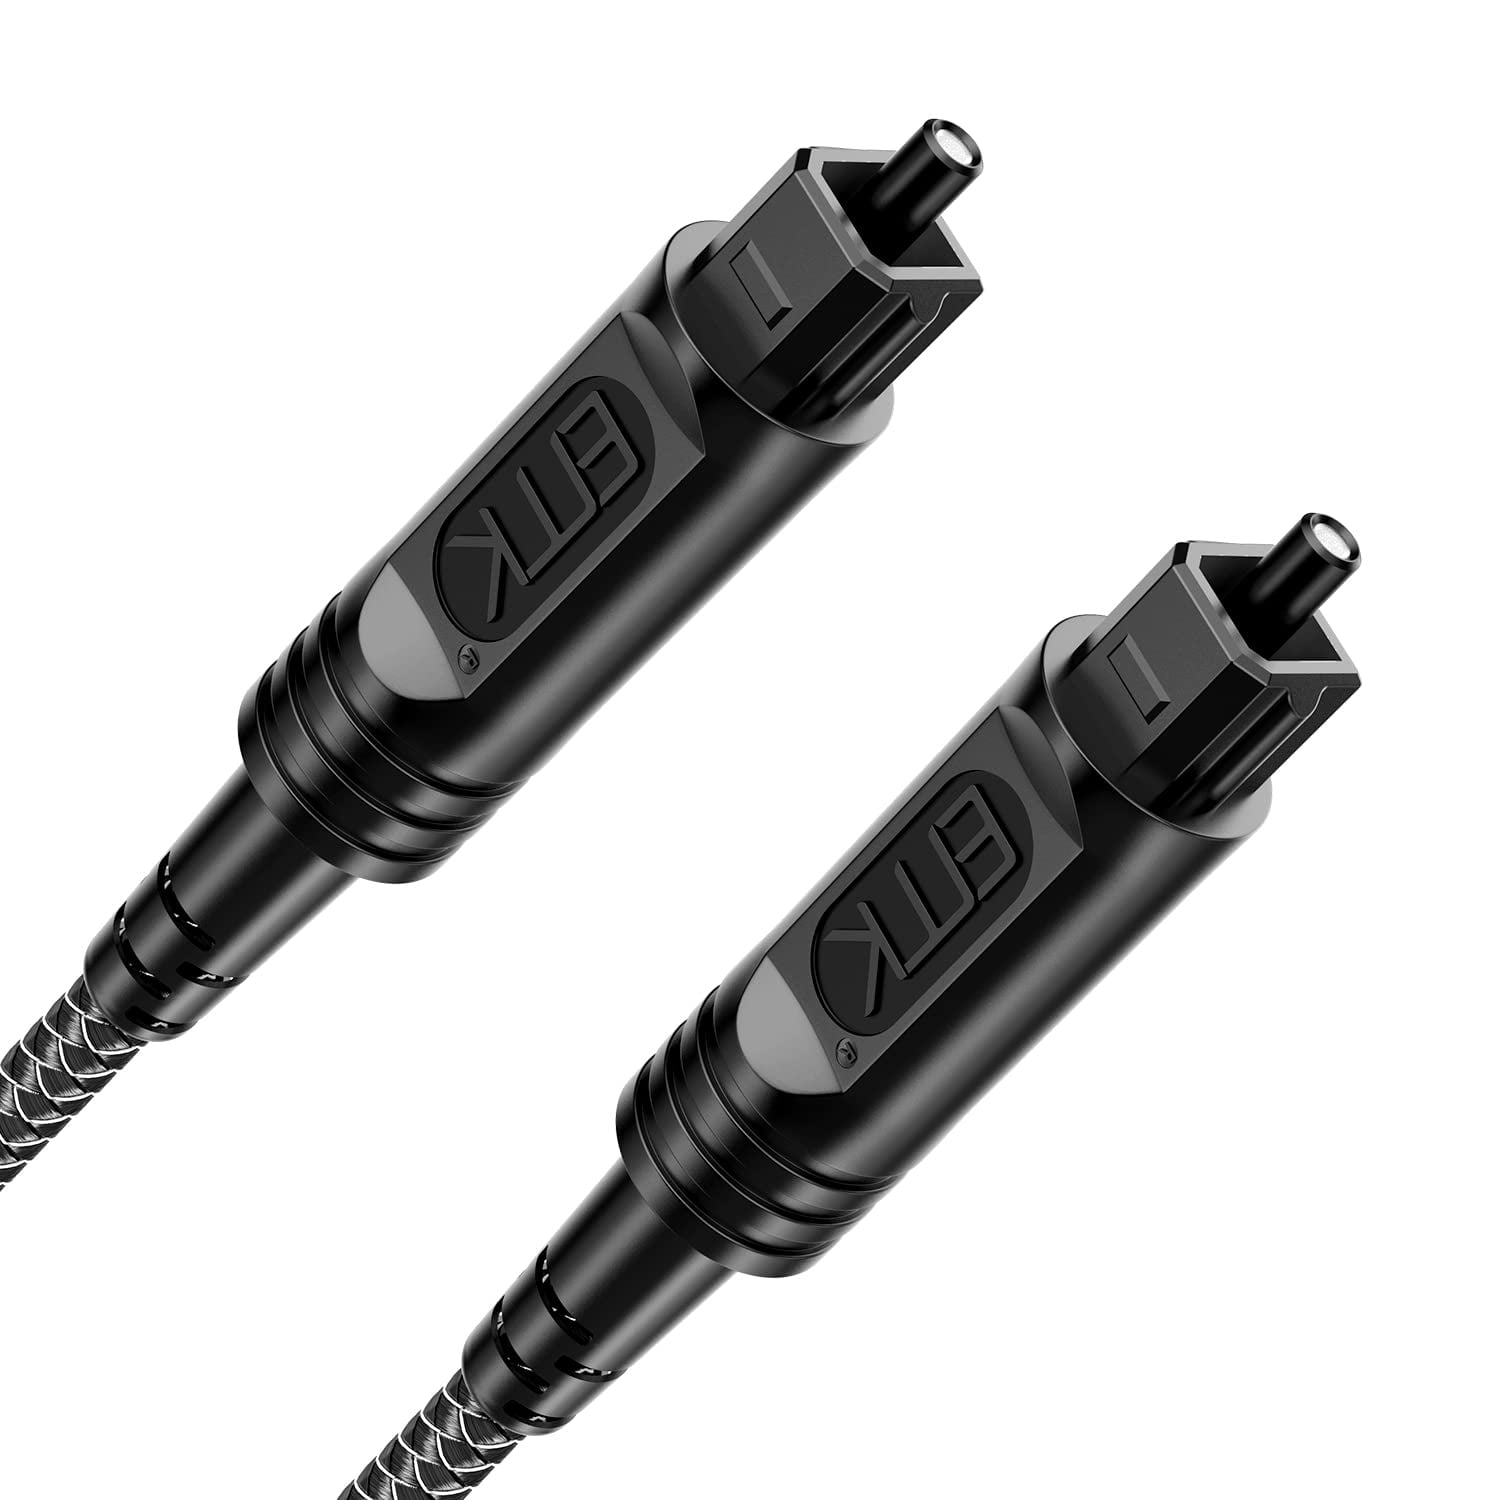 Optical Audio Cable Optical Cable Digital Fiber Optic Cable for Sound TV, PS4, Xbox, Home Theater (6 Feet/2M, Slim Nylon Braided, Black1) - Walmart.com